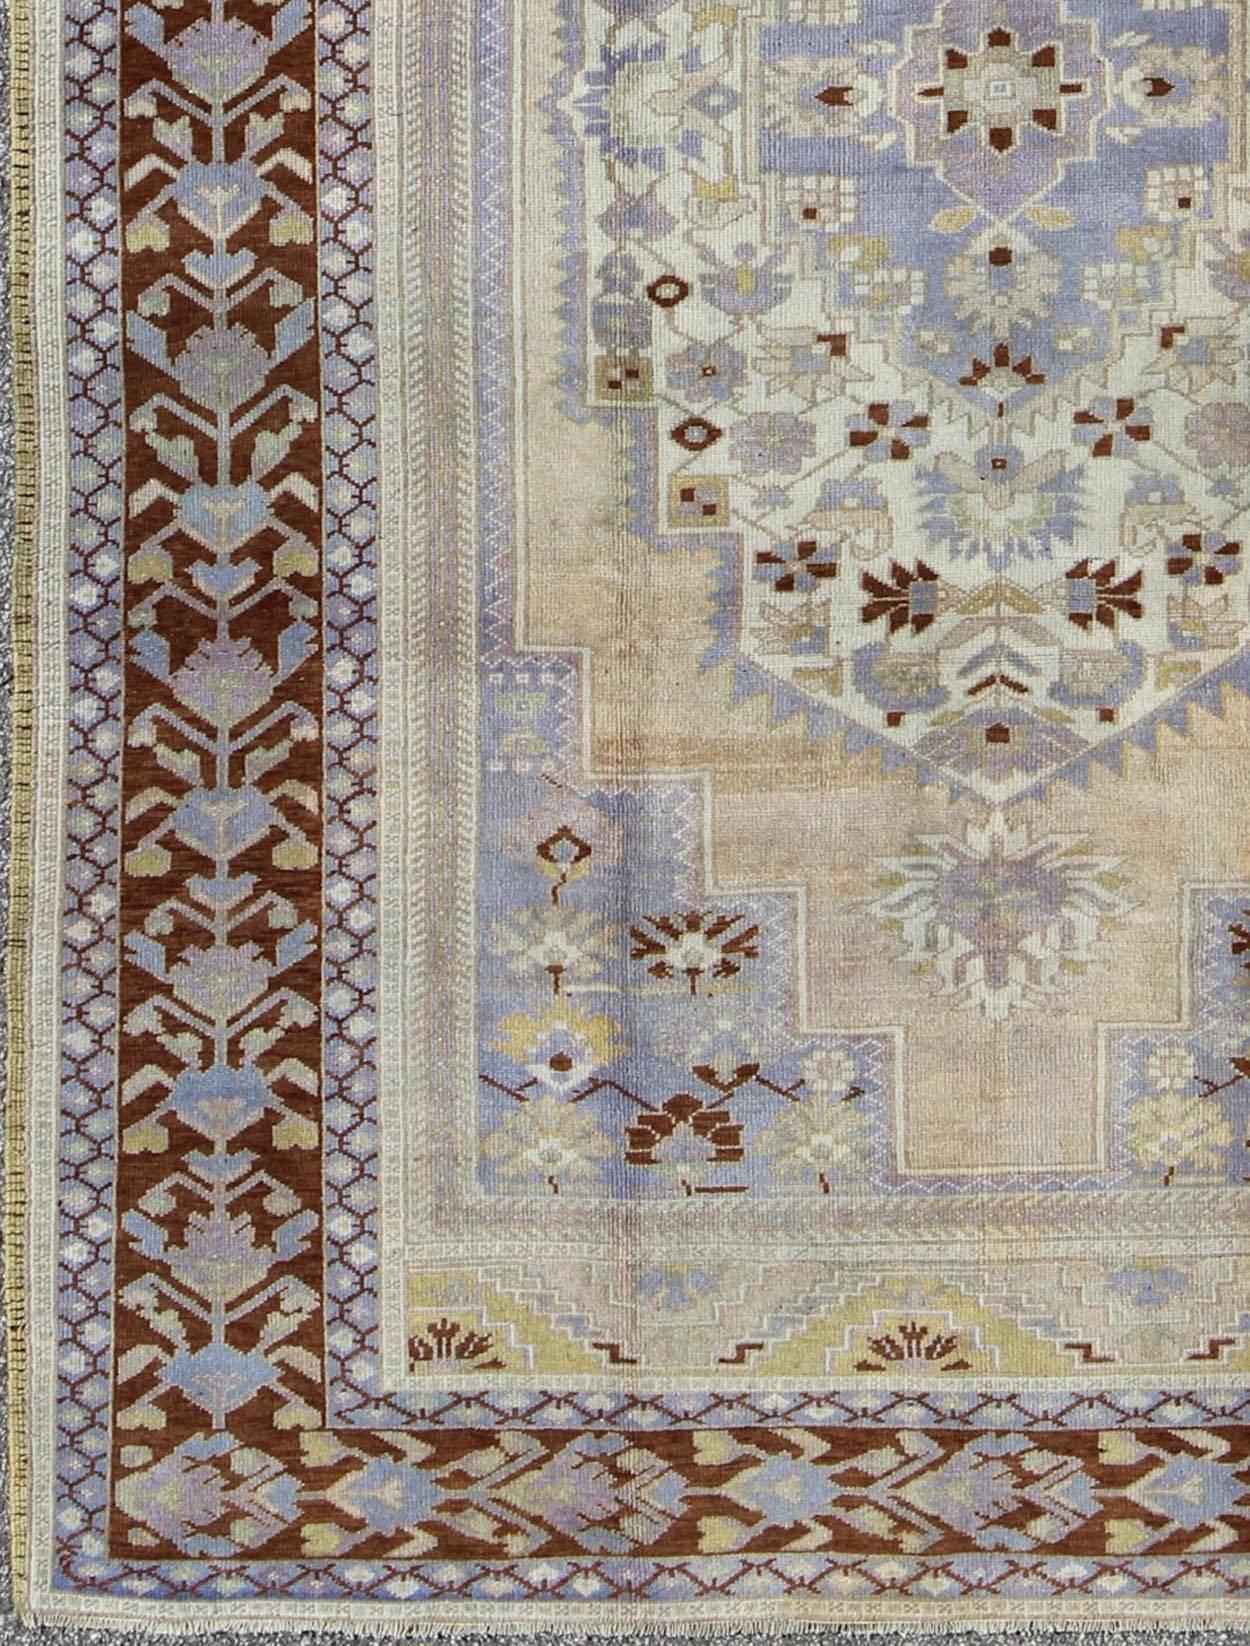 Vintage Turkish Oushak Rug in Brown, Light Purple, Blue, Camel and Wheat Colors.
This unique vintage Turkish Oushak rug shows a charming combination of warm and cool colors. Set on a brown border with a pop of the same brown throughout, this unique